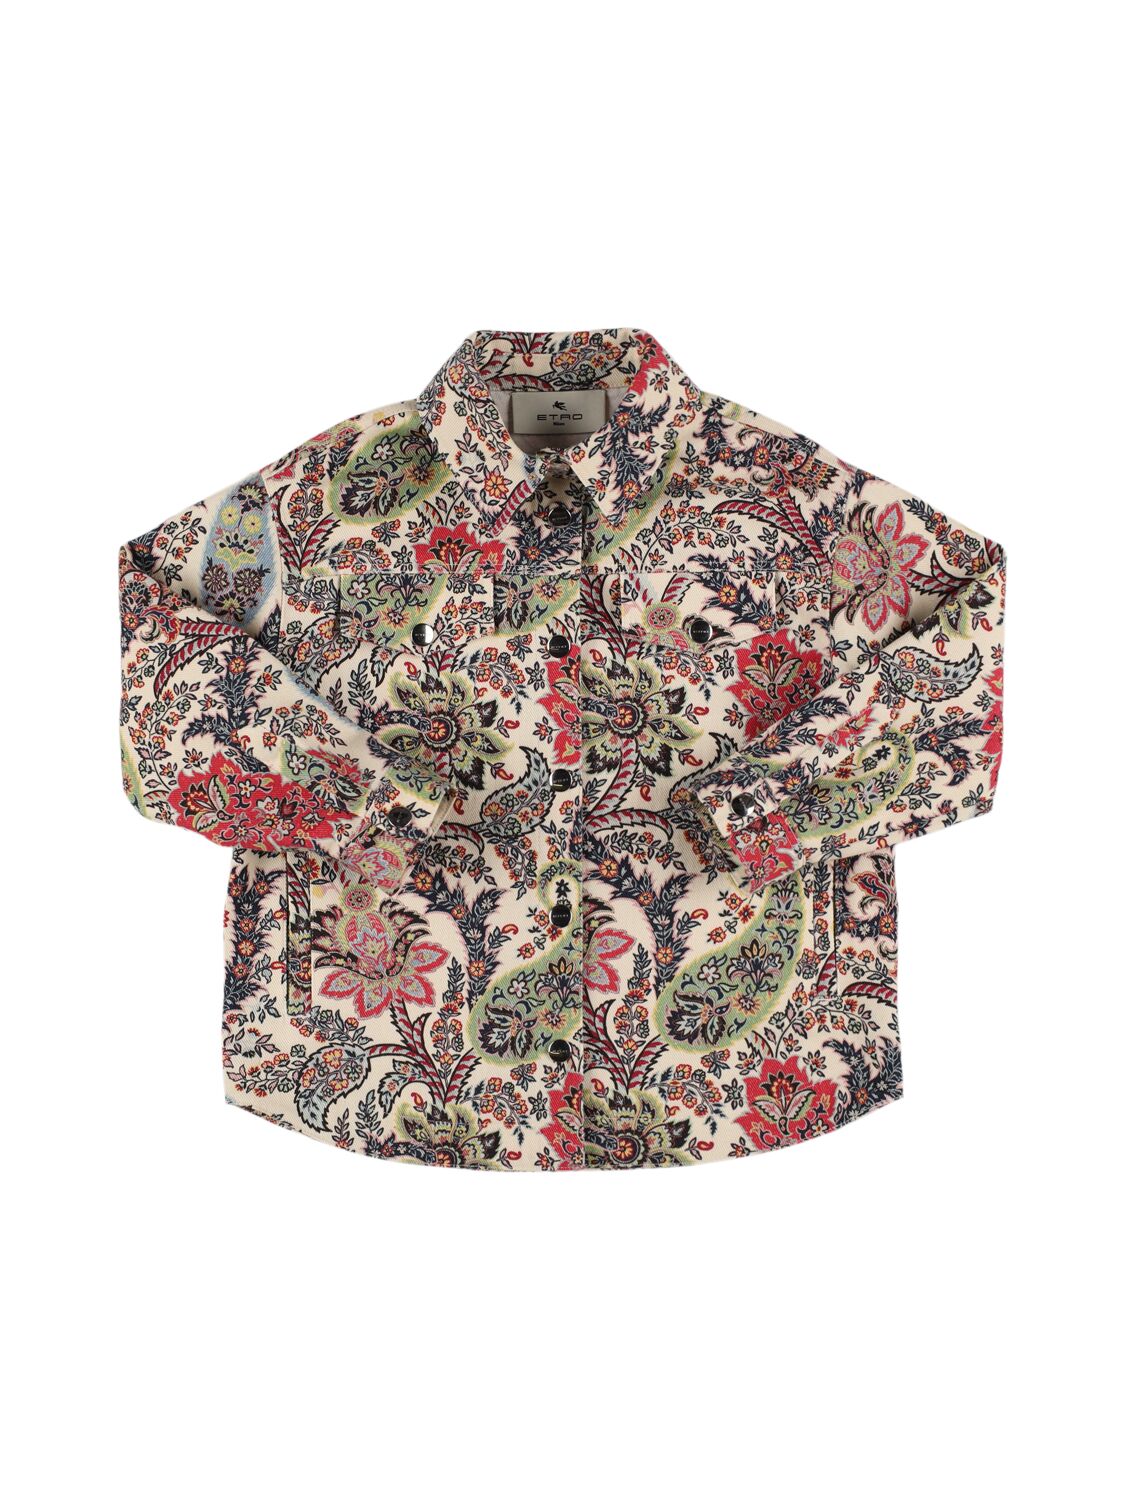 Etro Printed Stretch Cotton Jacket In Multi